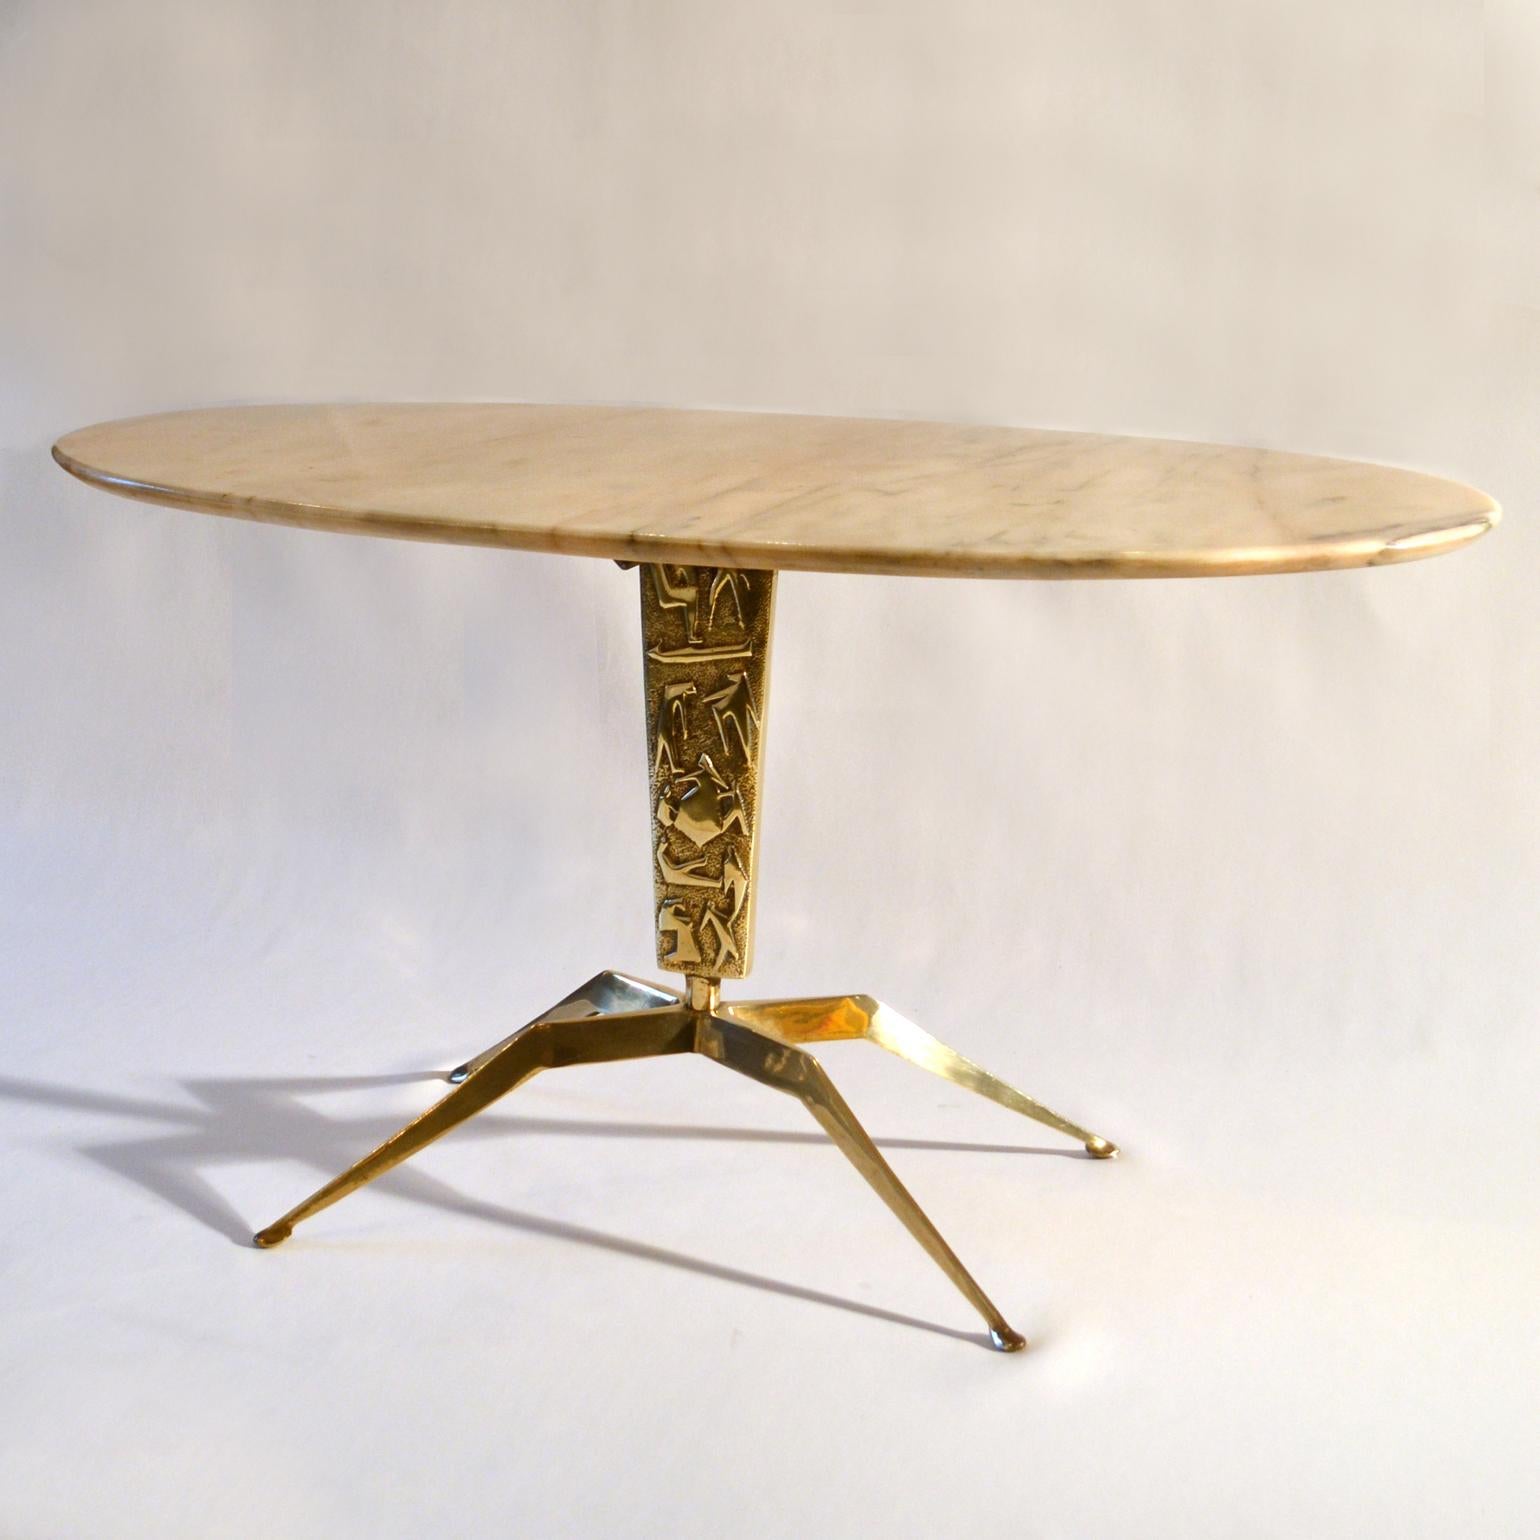 Oval coffee table with pink cream top with black veins supported by a sculpted cast brass base with a relief of figures and four spider legs on oval feet. The figures on the leg are abstracted in a typical 1950s style and tell the story of